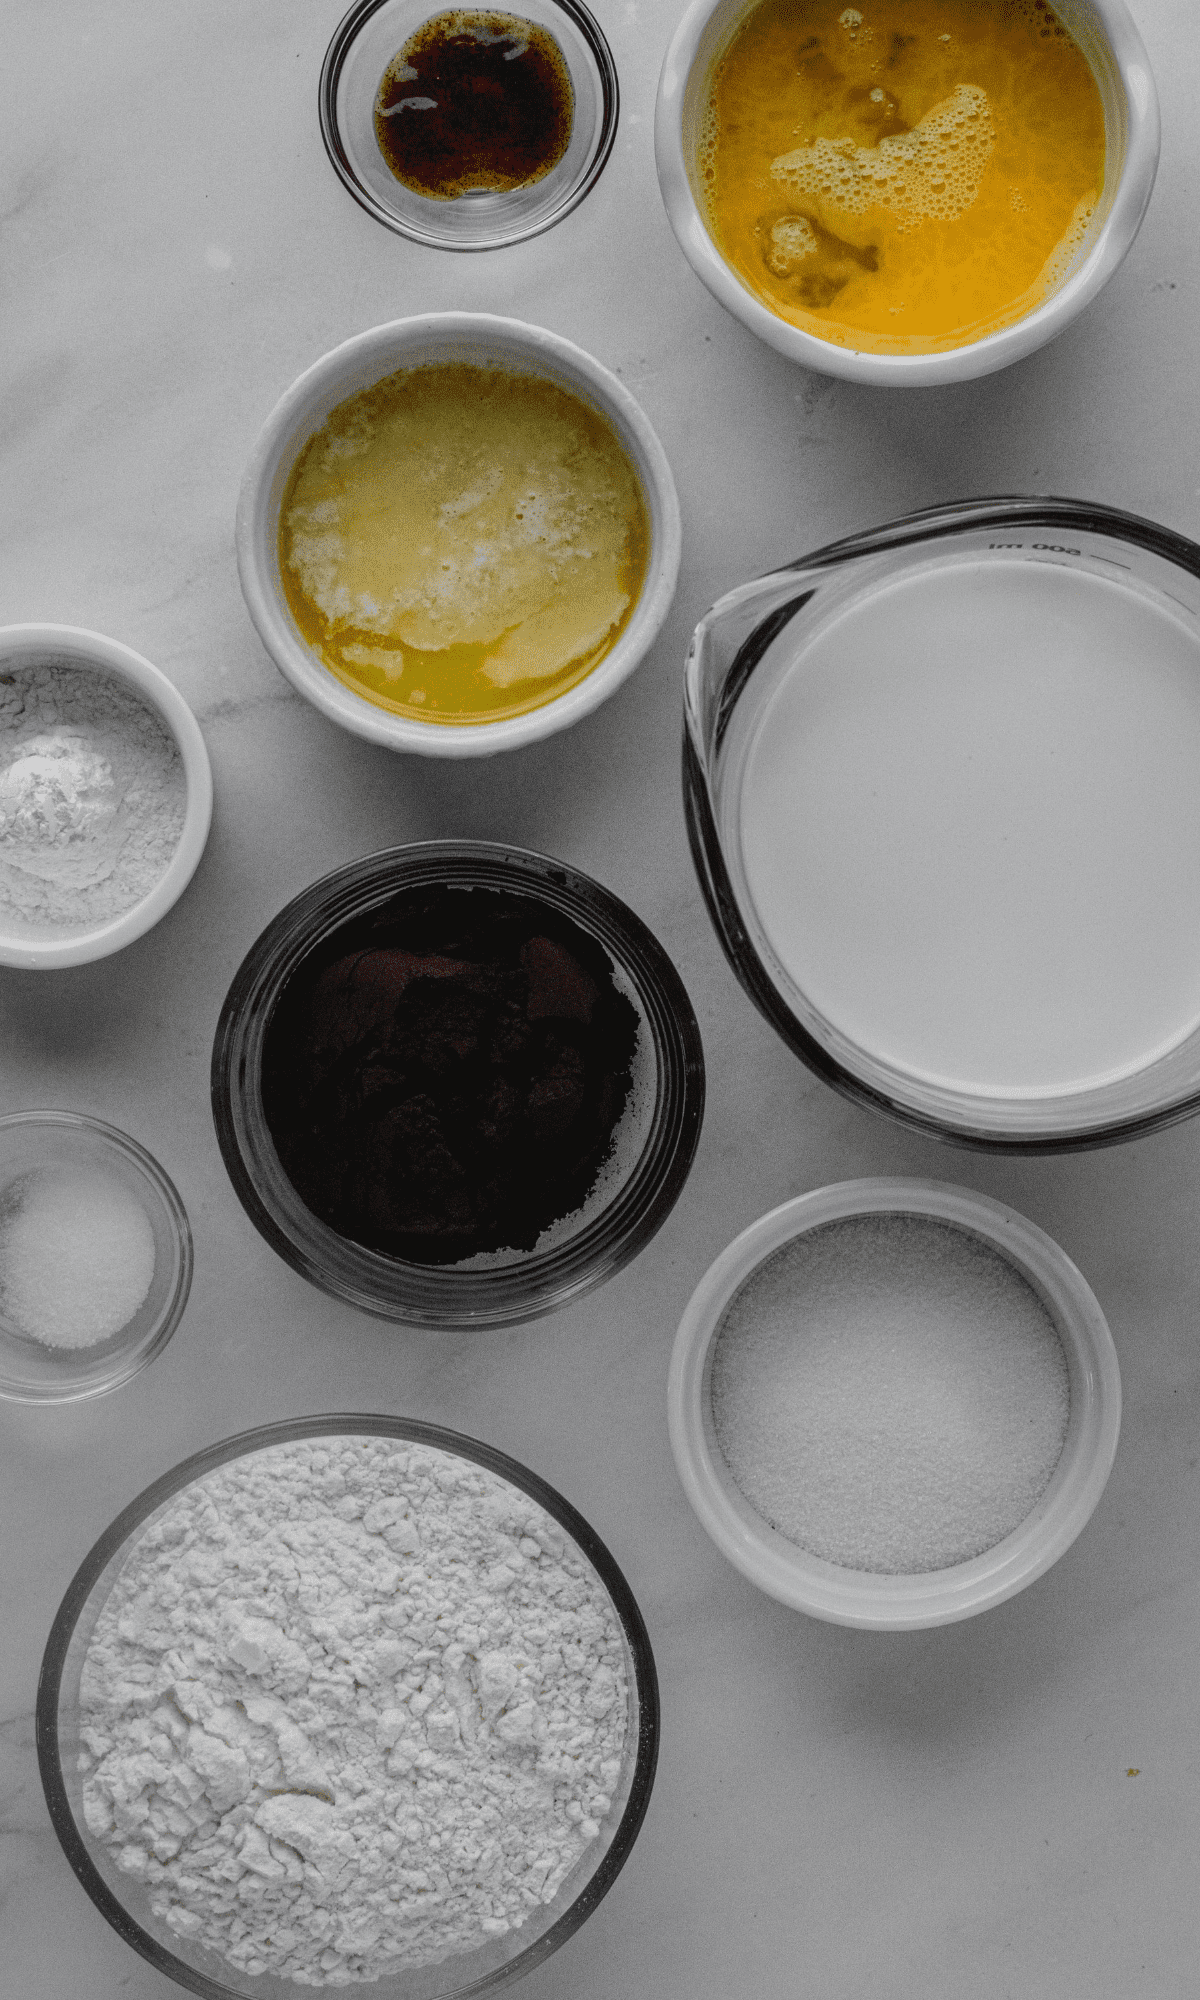 Ingredients for Cocoa Buttermilk Pancakes in varying bowl shapes and sizes.